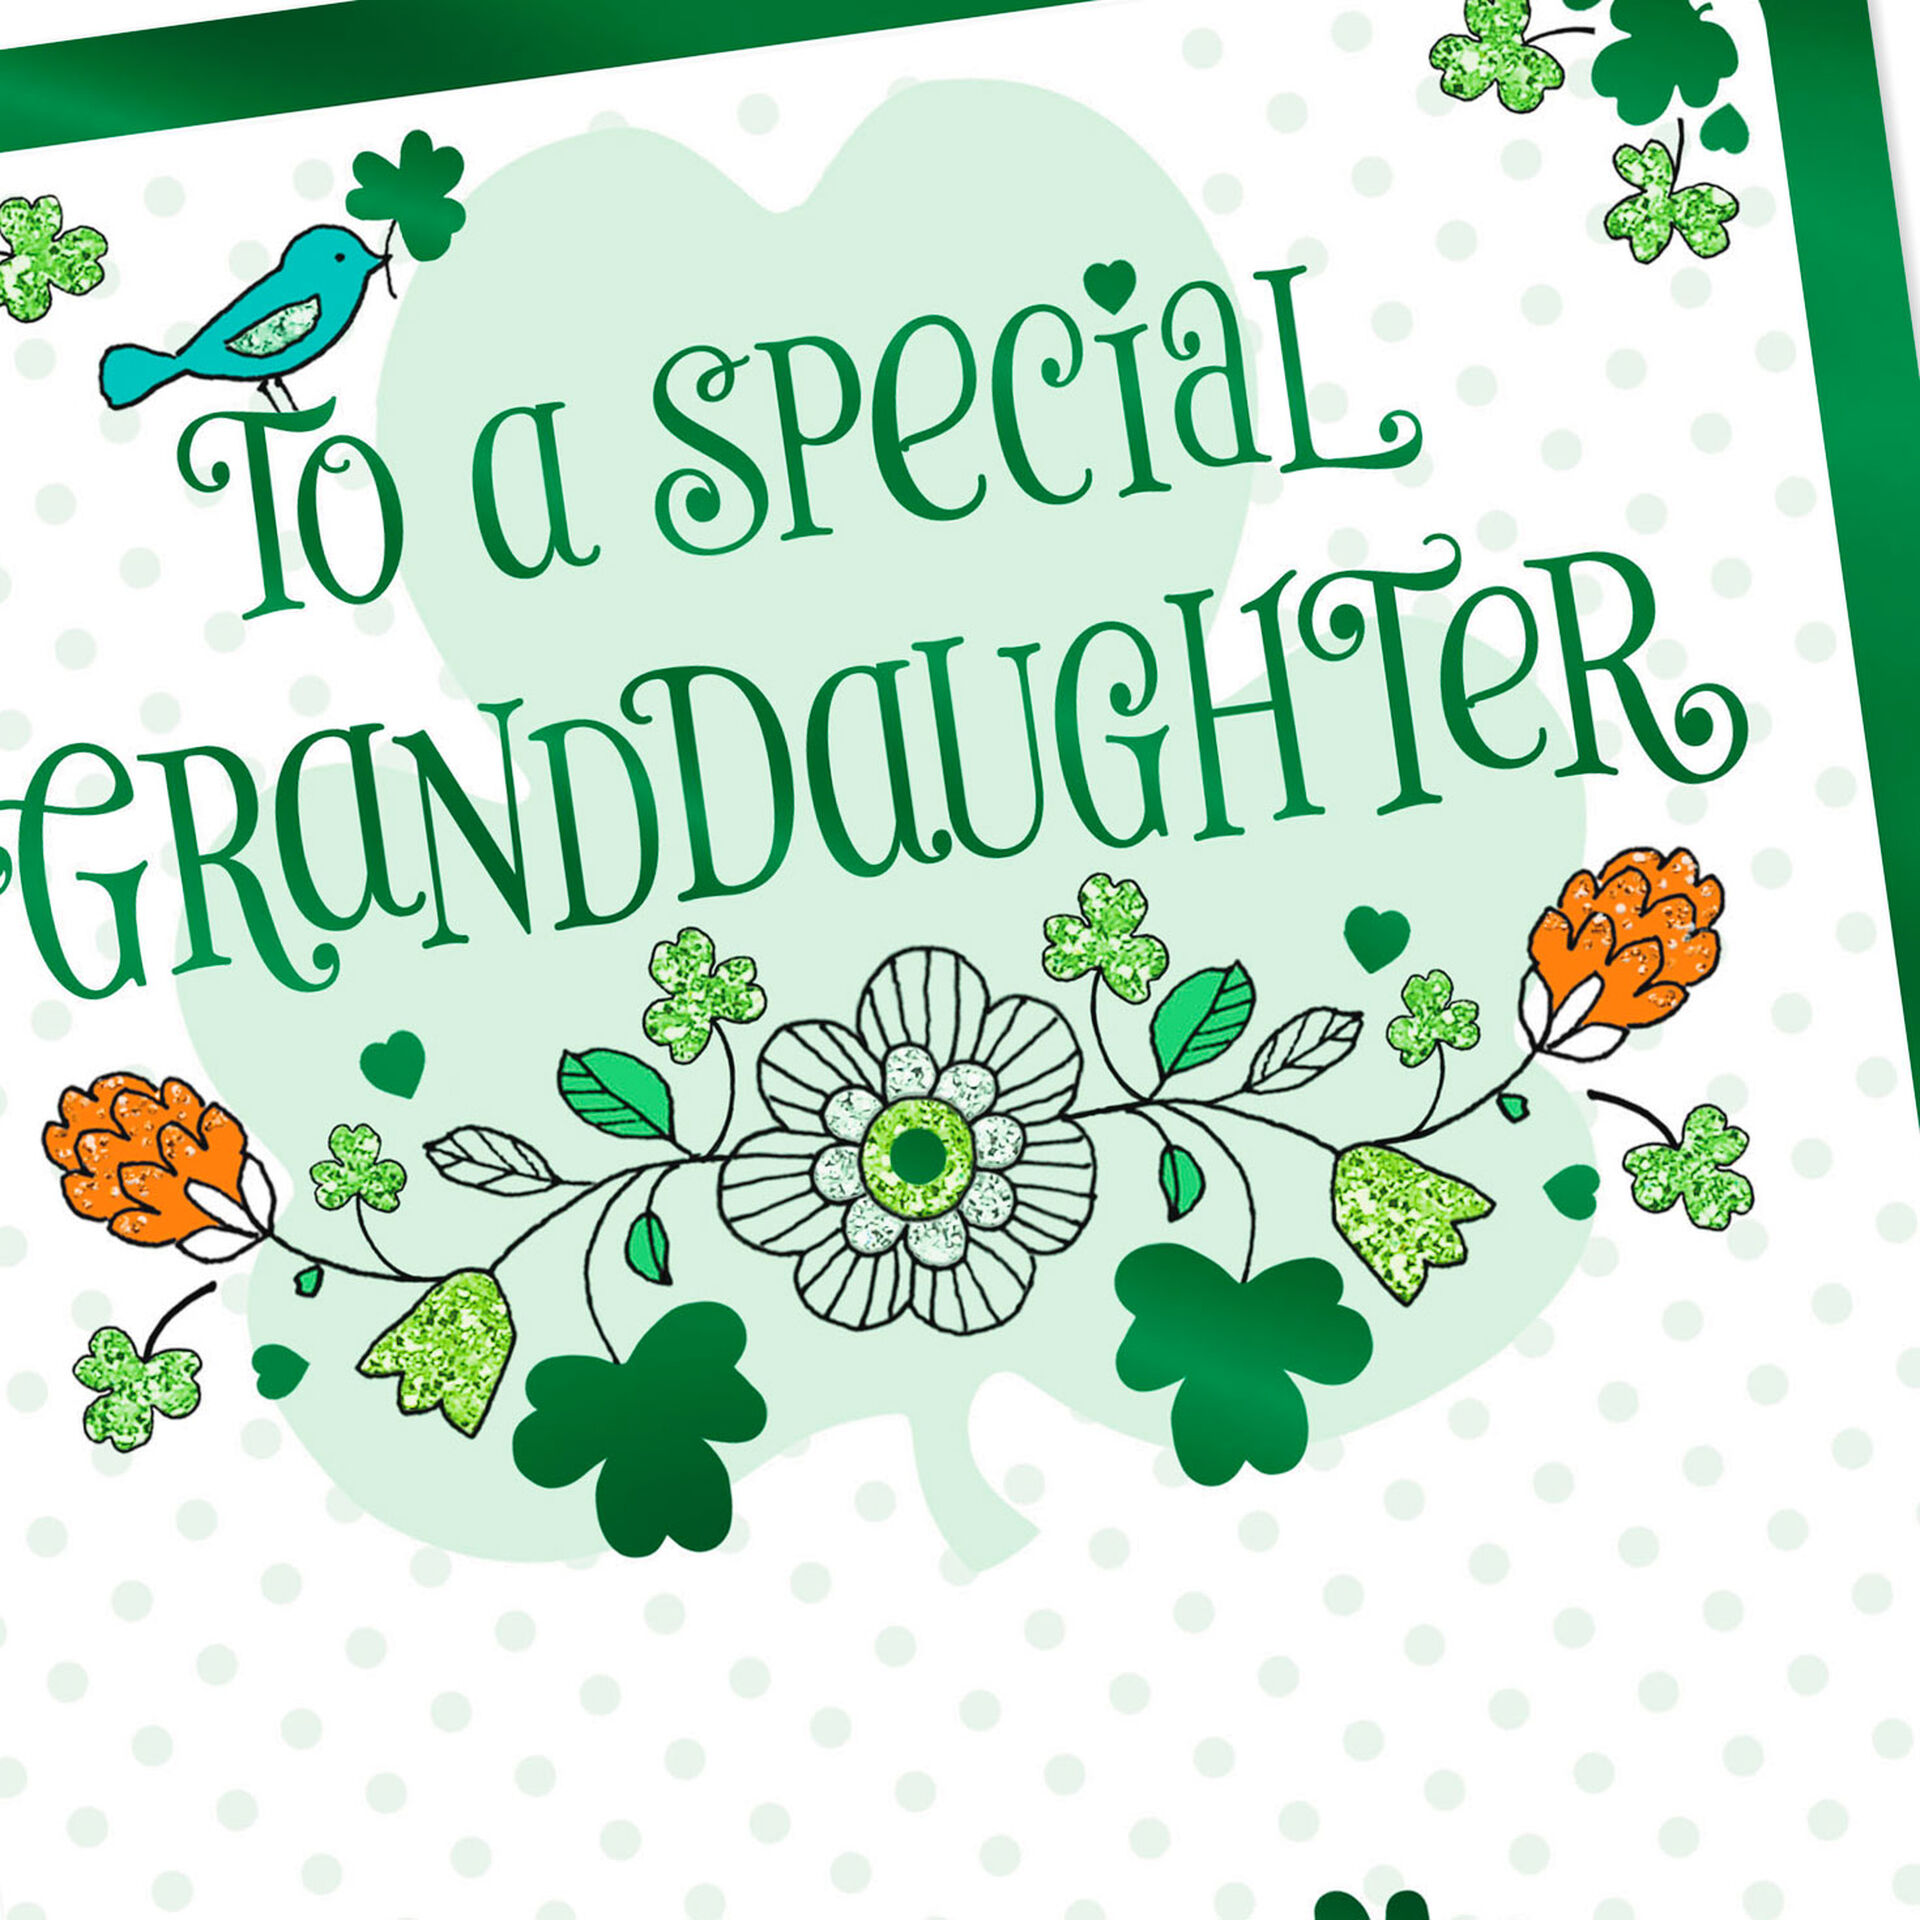 Wishes Full Of Love St Patricks Day Card For Granddaughter Greeting Cards Hallmark 4300